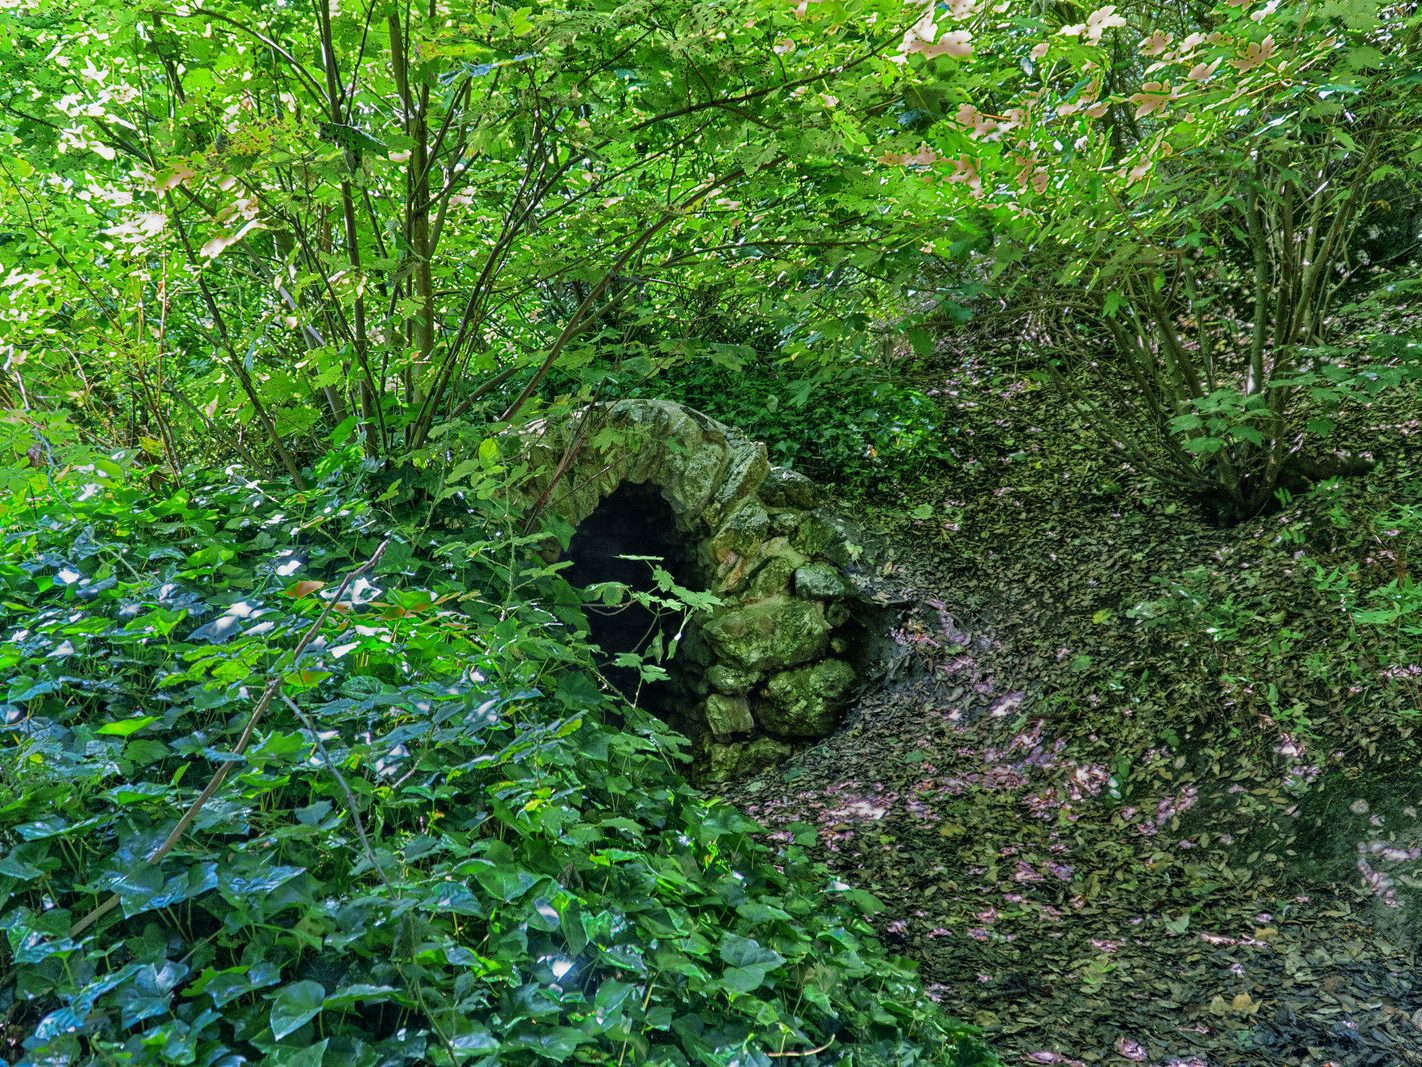 ST ANN'S WELL AT ST ANNE'S PARK [A HOLY WELL NOW DESCRIBED AS A WISHING WELL] 004